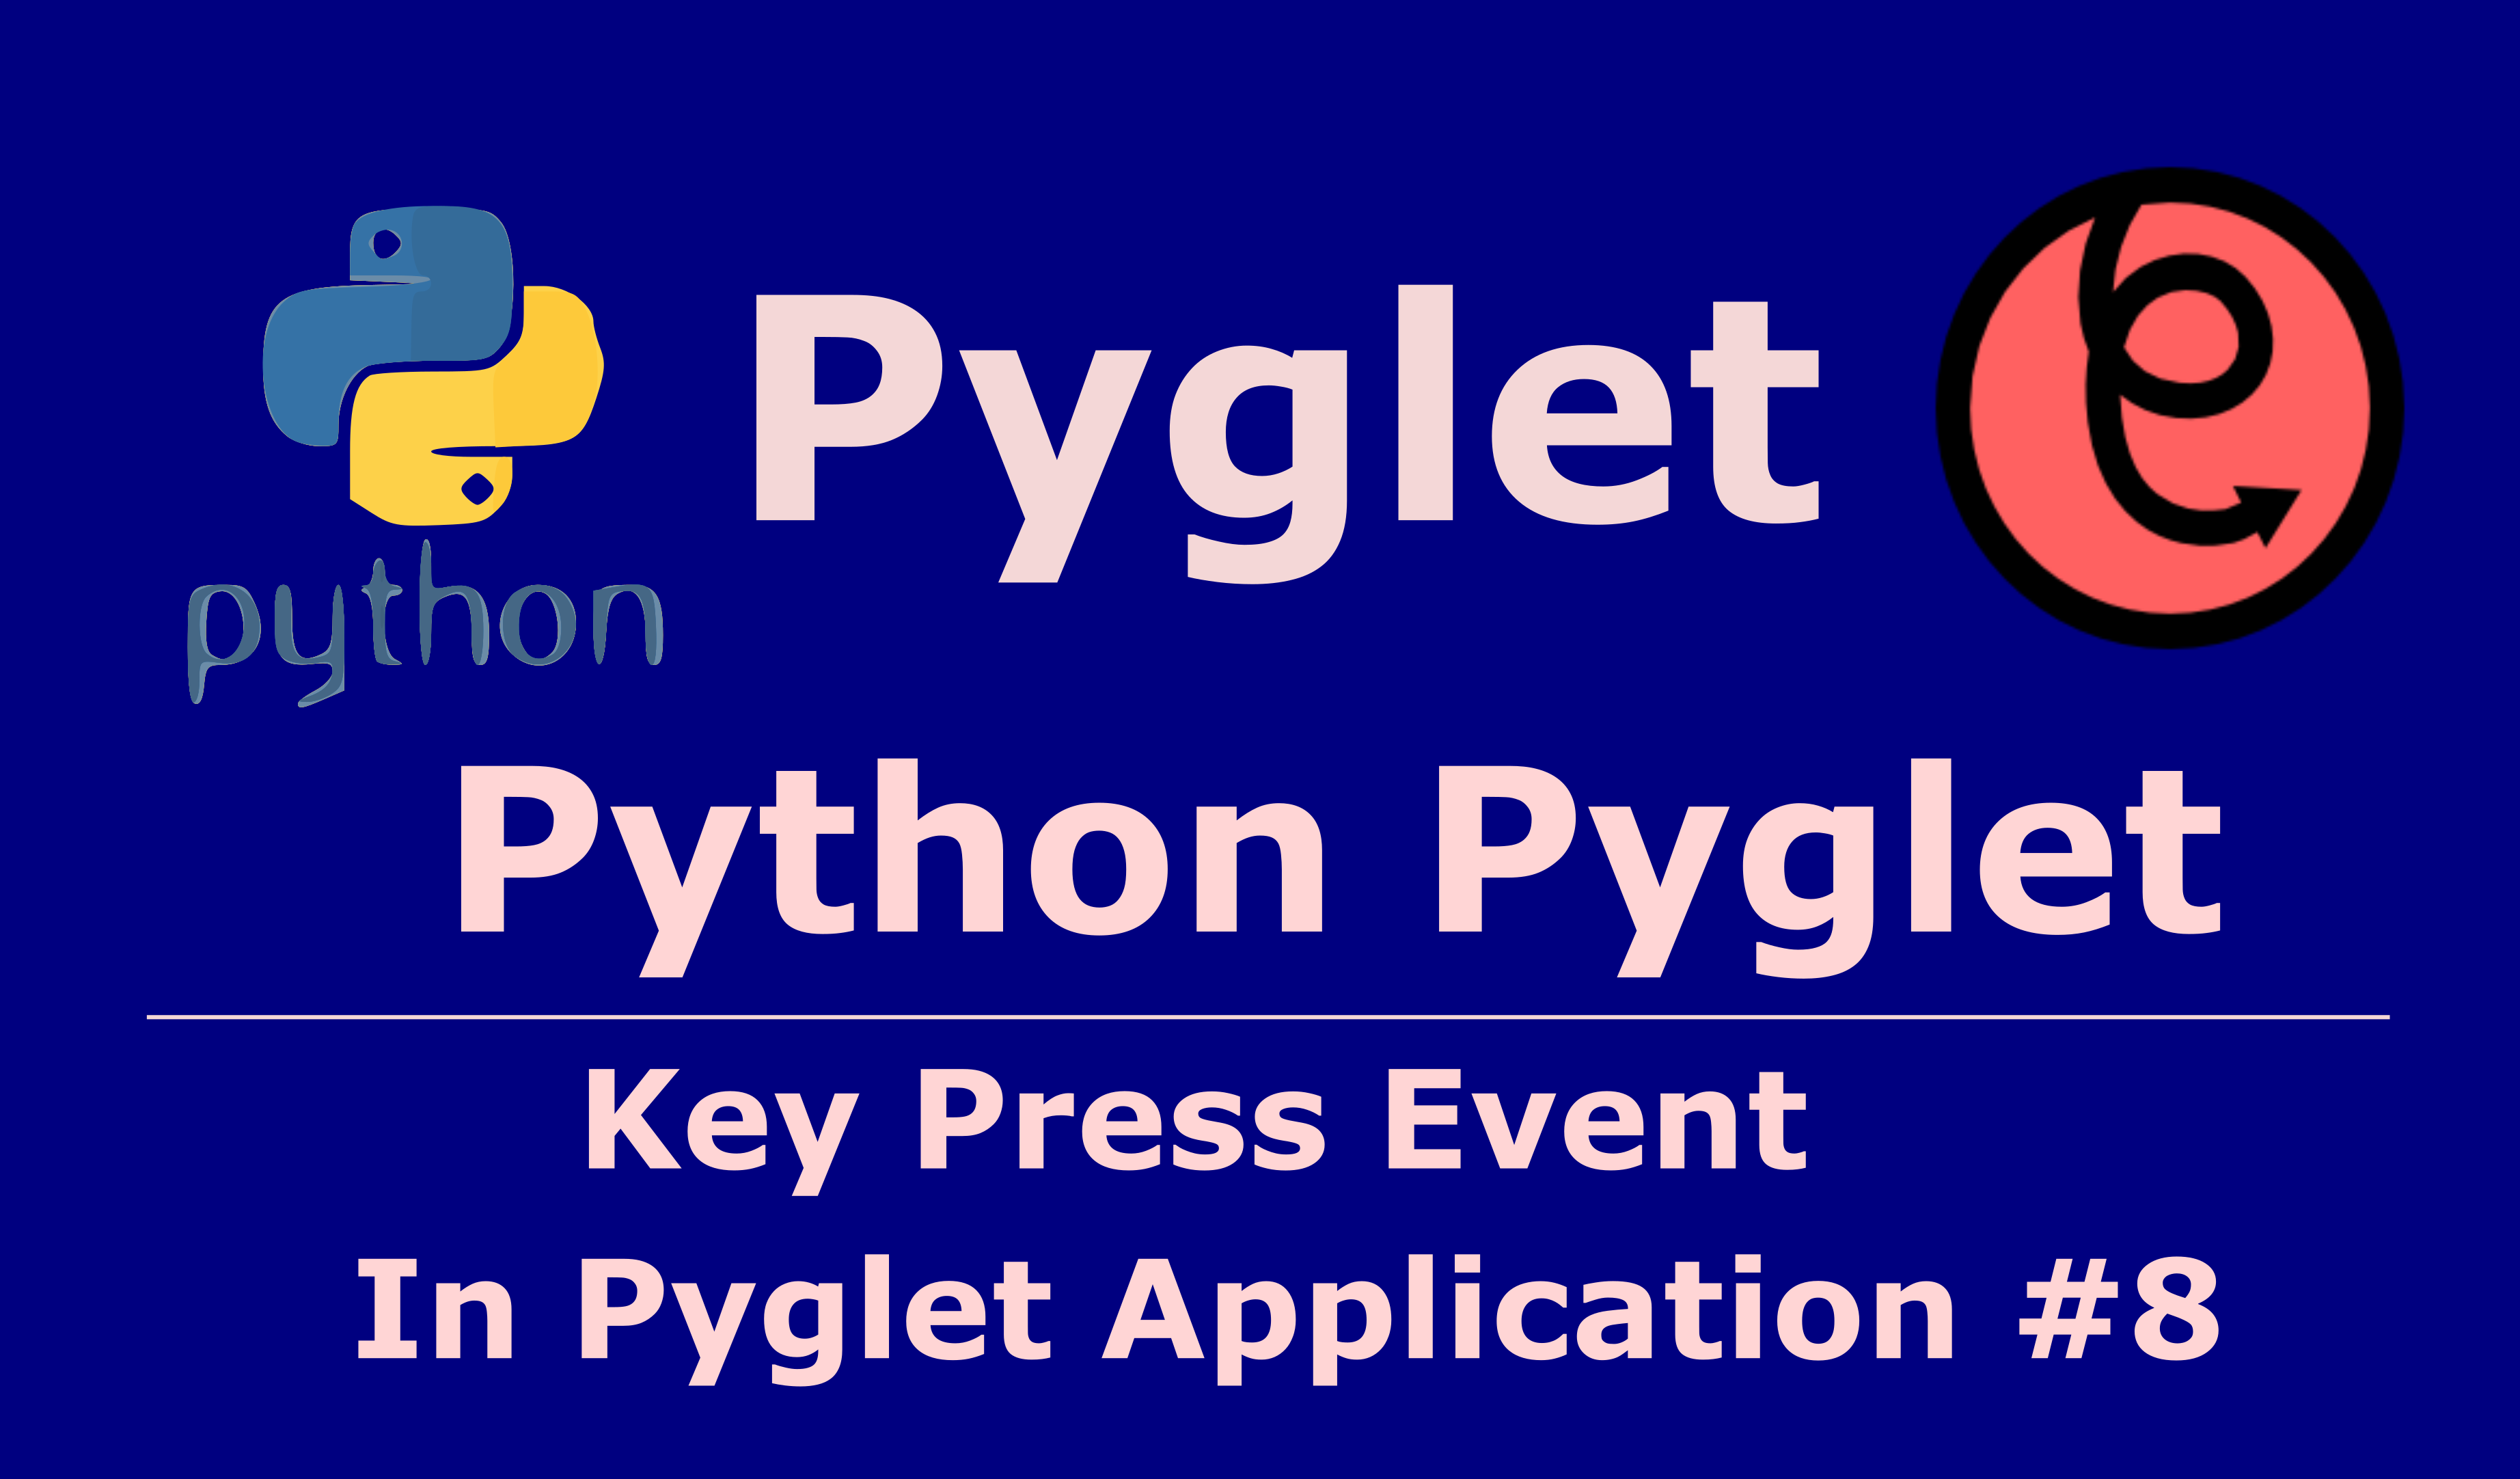 How To Handle Keyboard Press Events In Python Pyglet